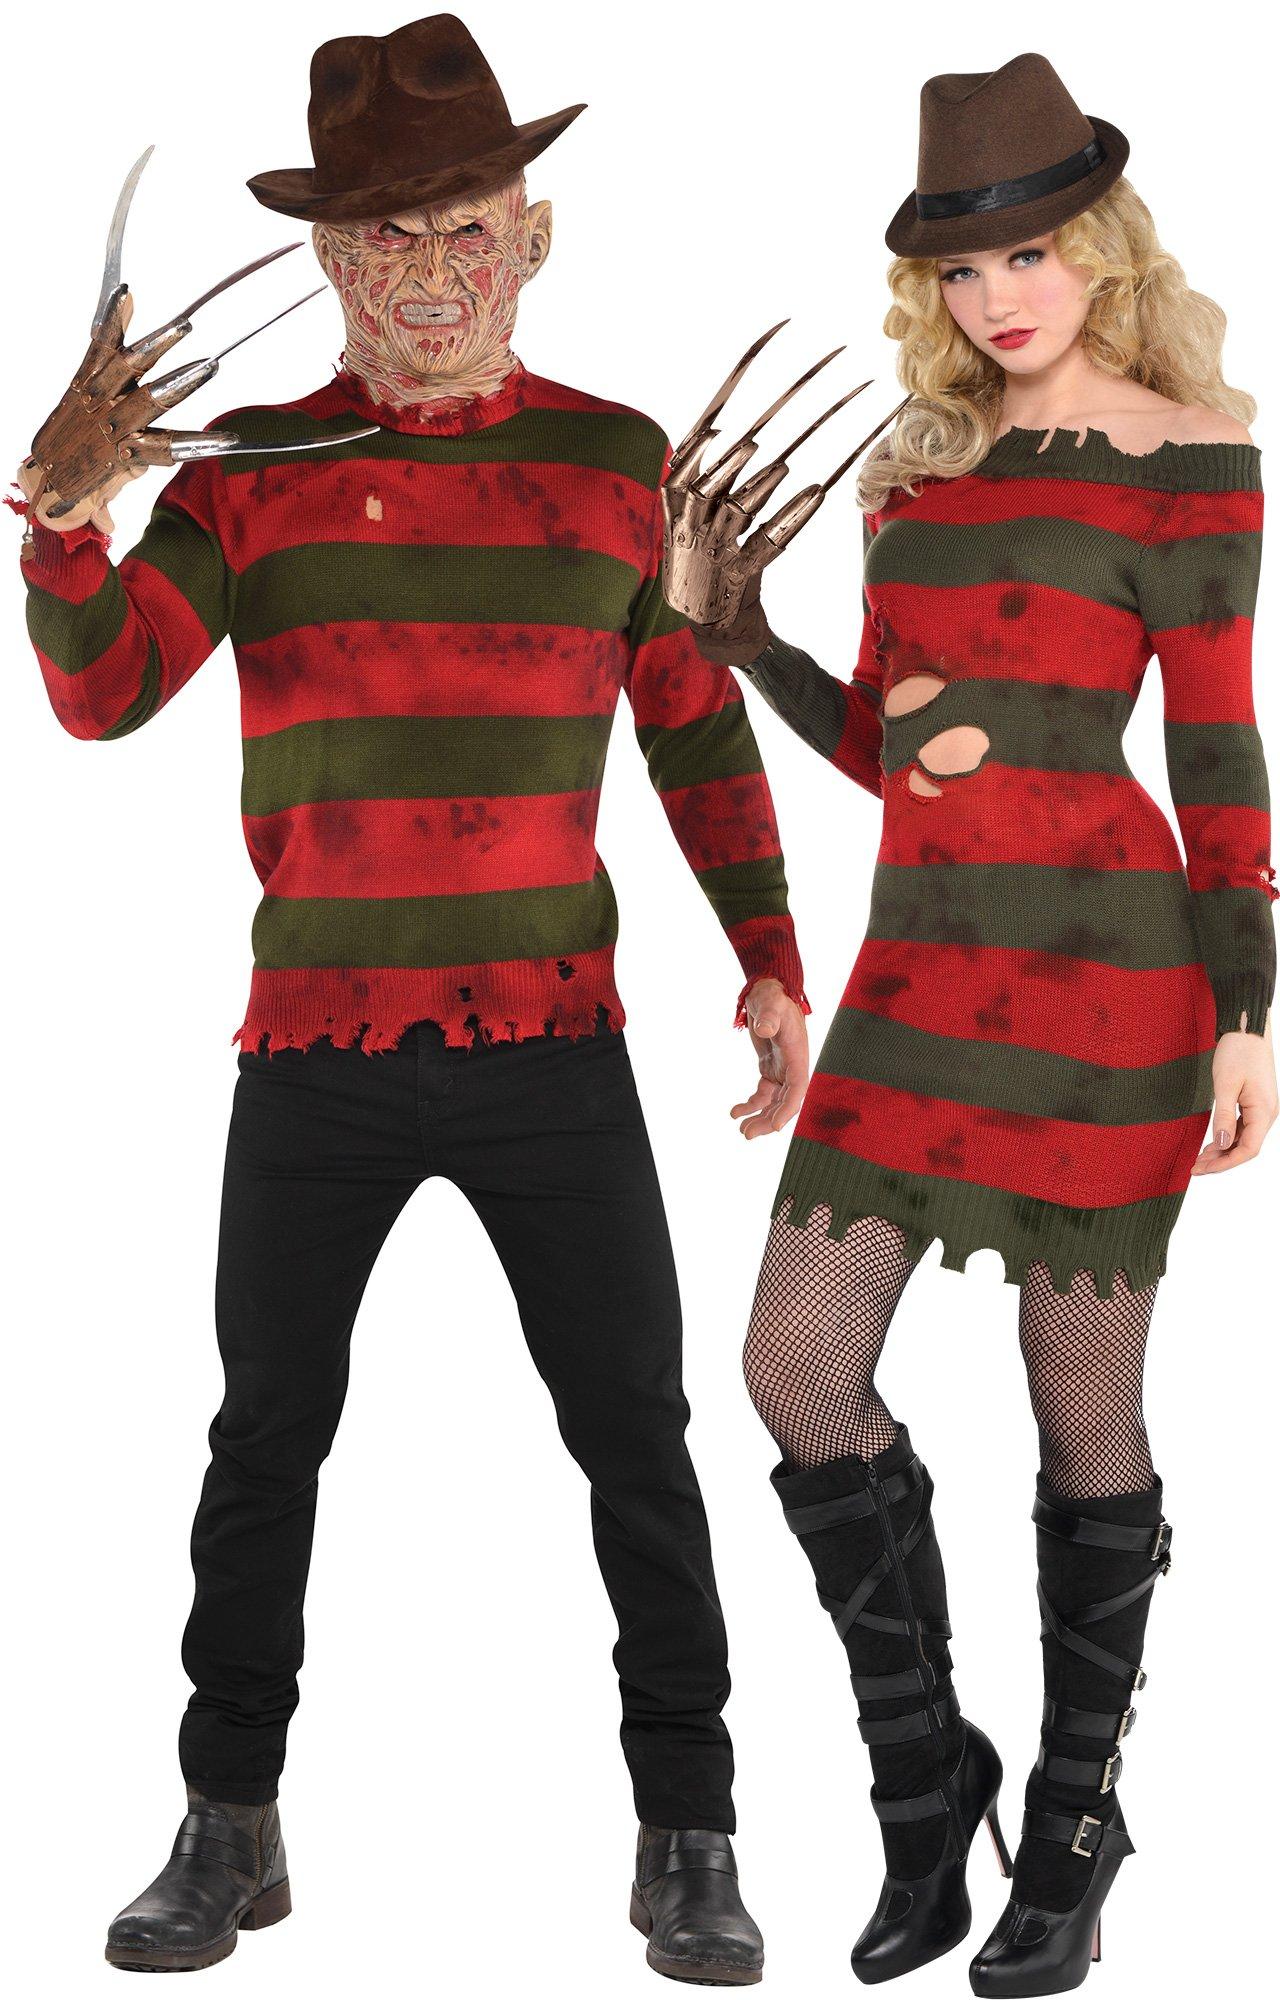 Freddy Krueger Couples Costumes - A Nightmare on Elm Street | Party City